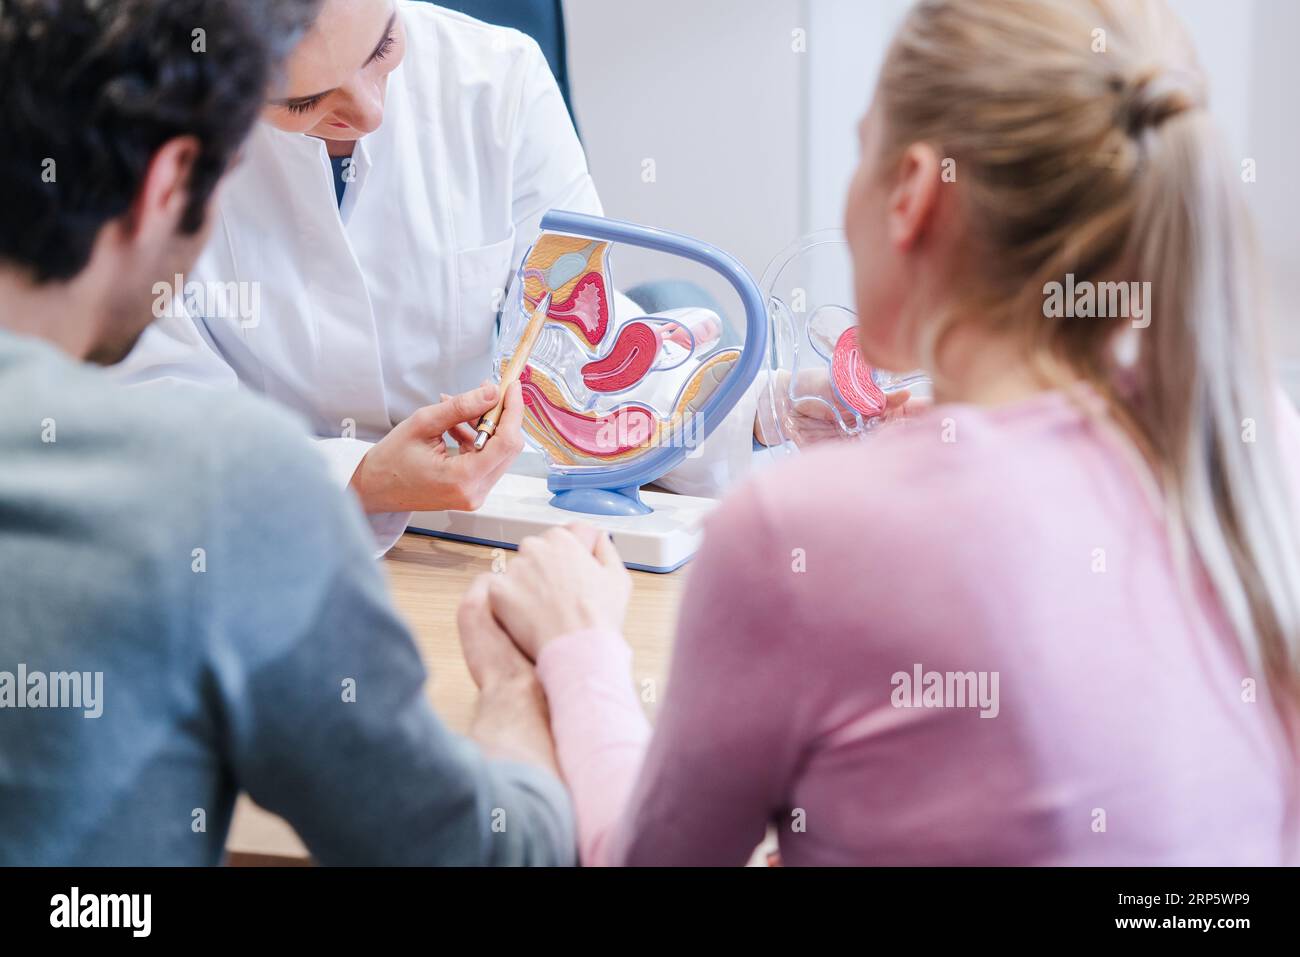 Couple wishing to have children in fertility clinic with doctor Stock Photo